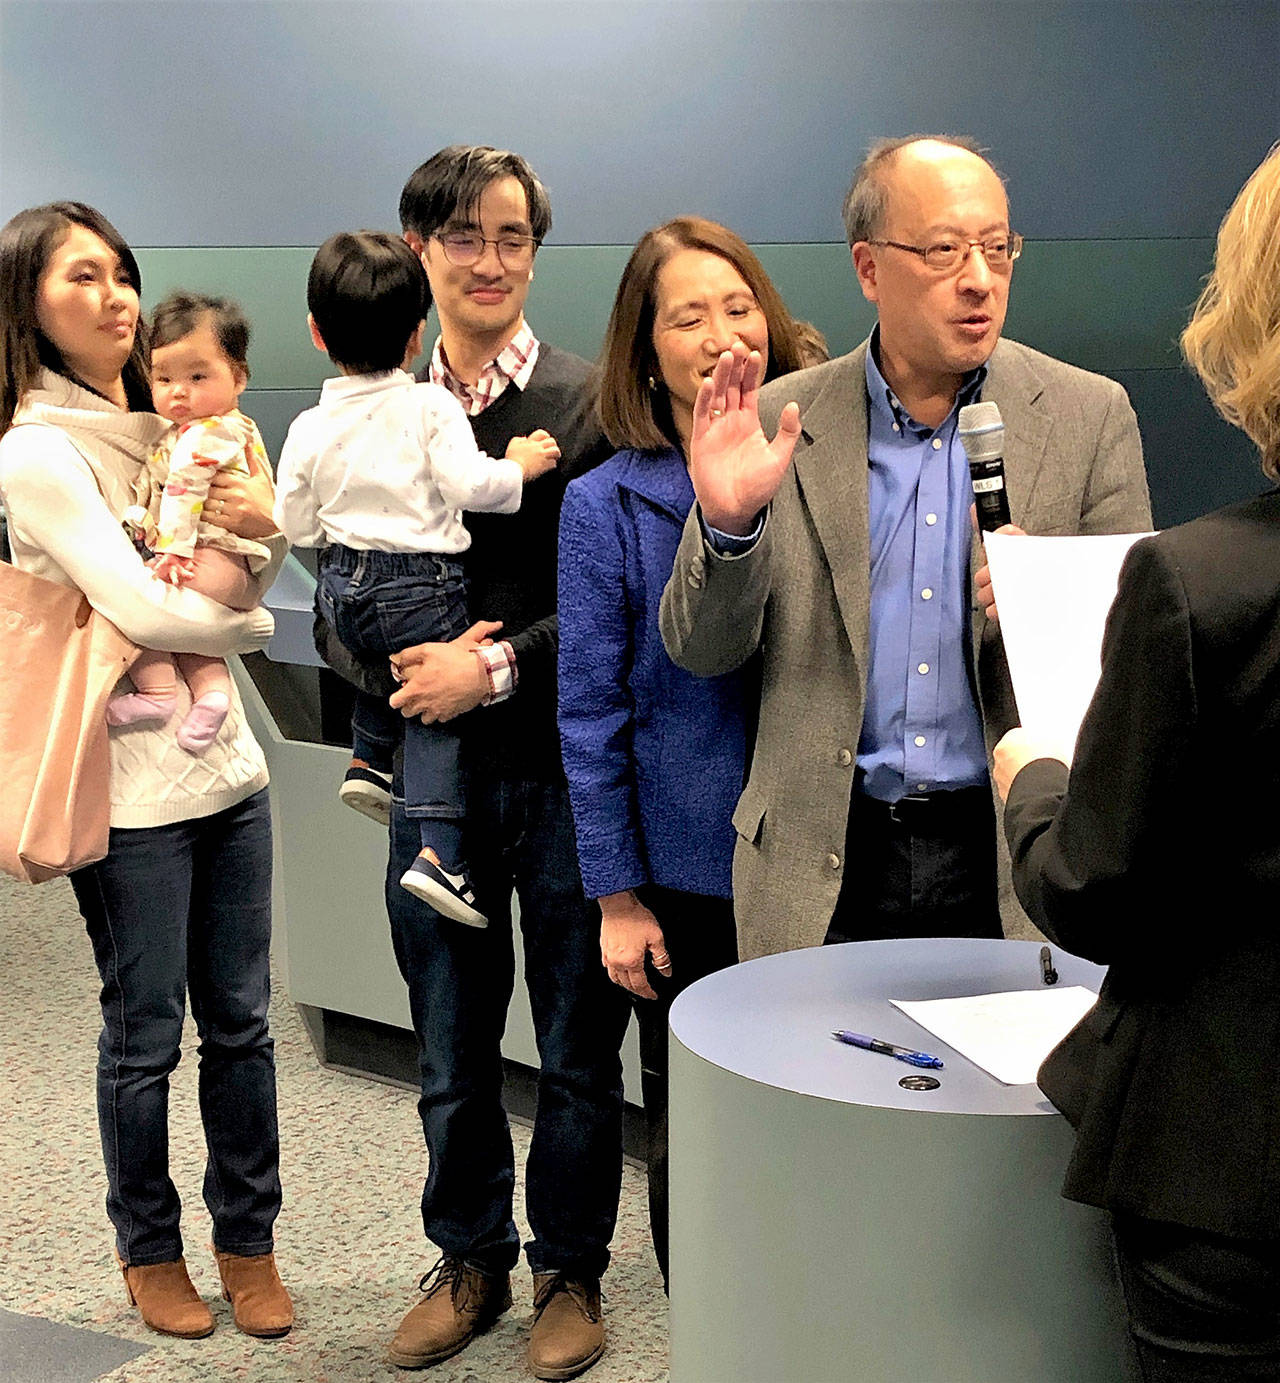 Surrounded by his family, Mayor Benson Wong was sworn in on Jan. 7, 2020. Photo courtesy of city communications manager Ross Freeman